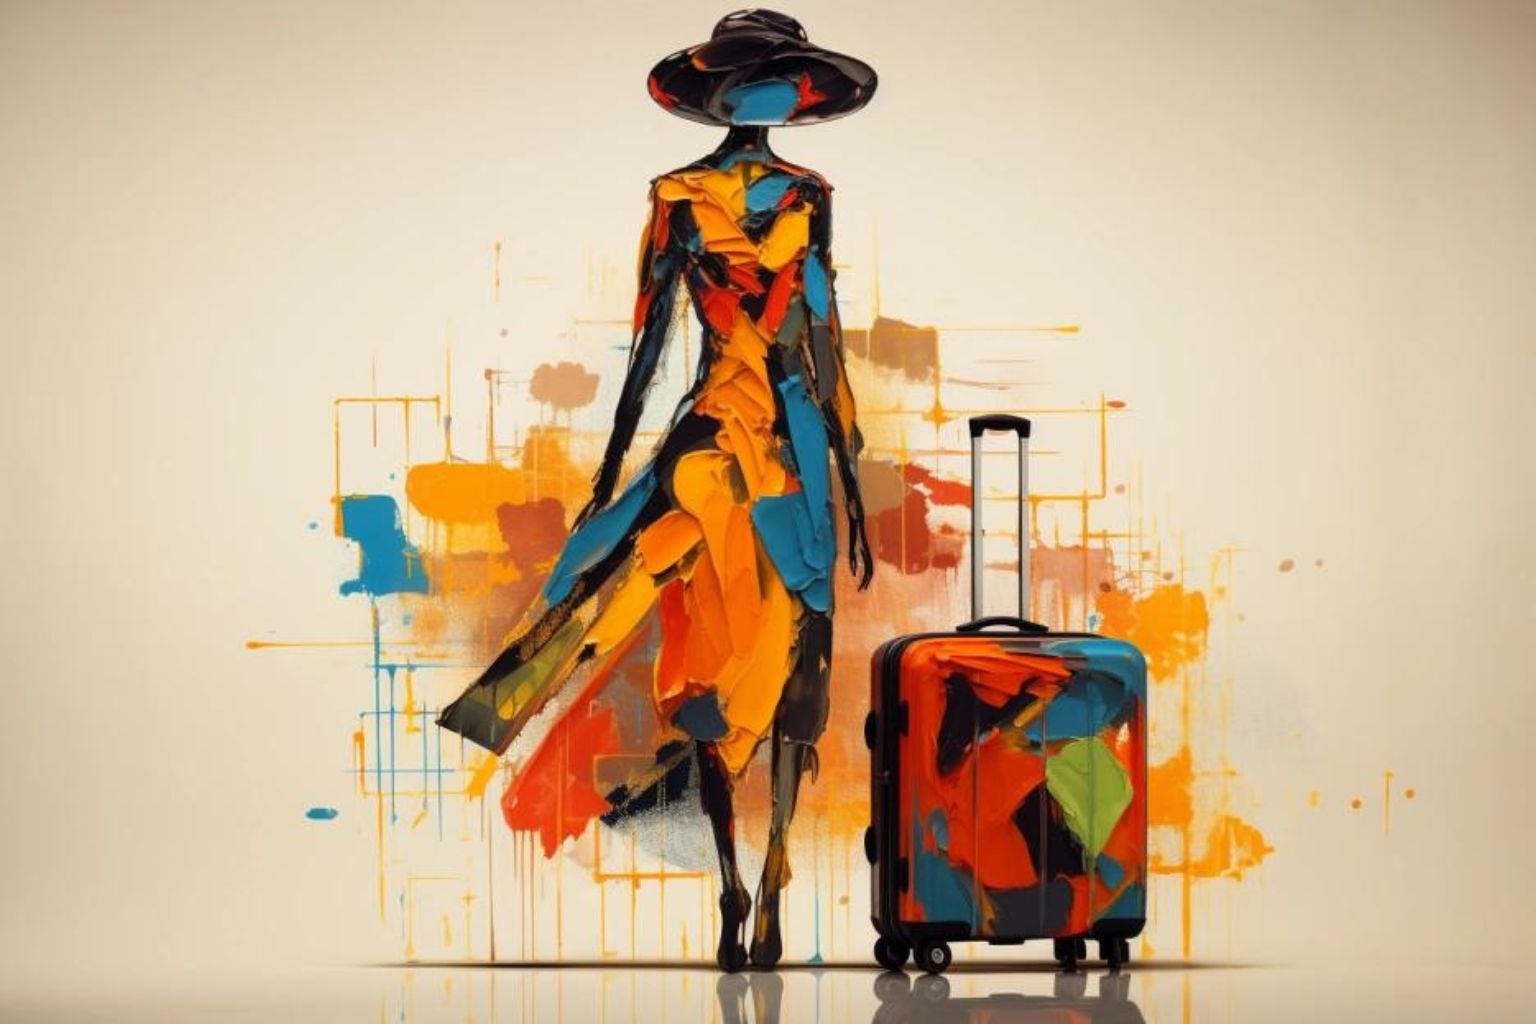 Rose showed up at the luggage carousel in Baltimore after a recent flight she found her almost-new American Tourister bag in bad shape.